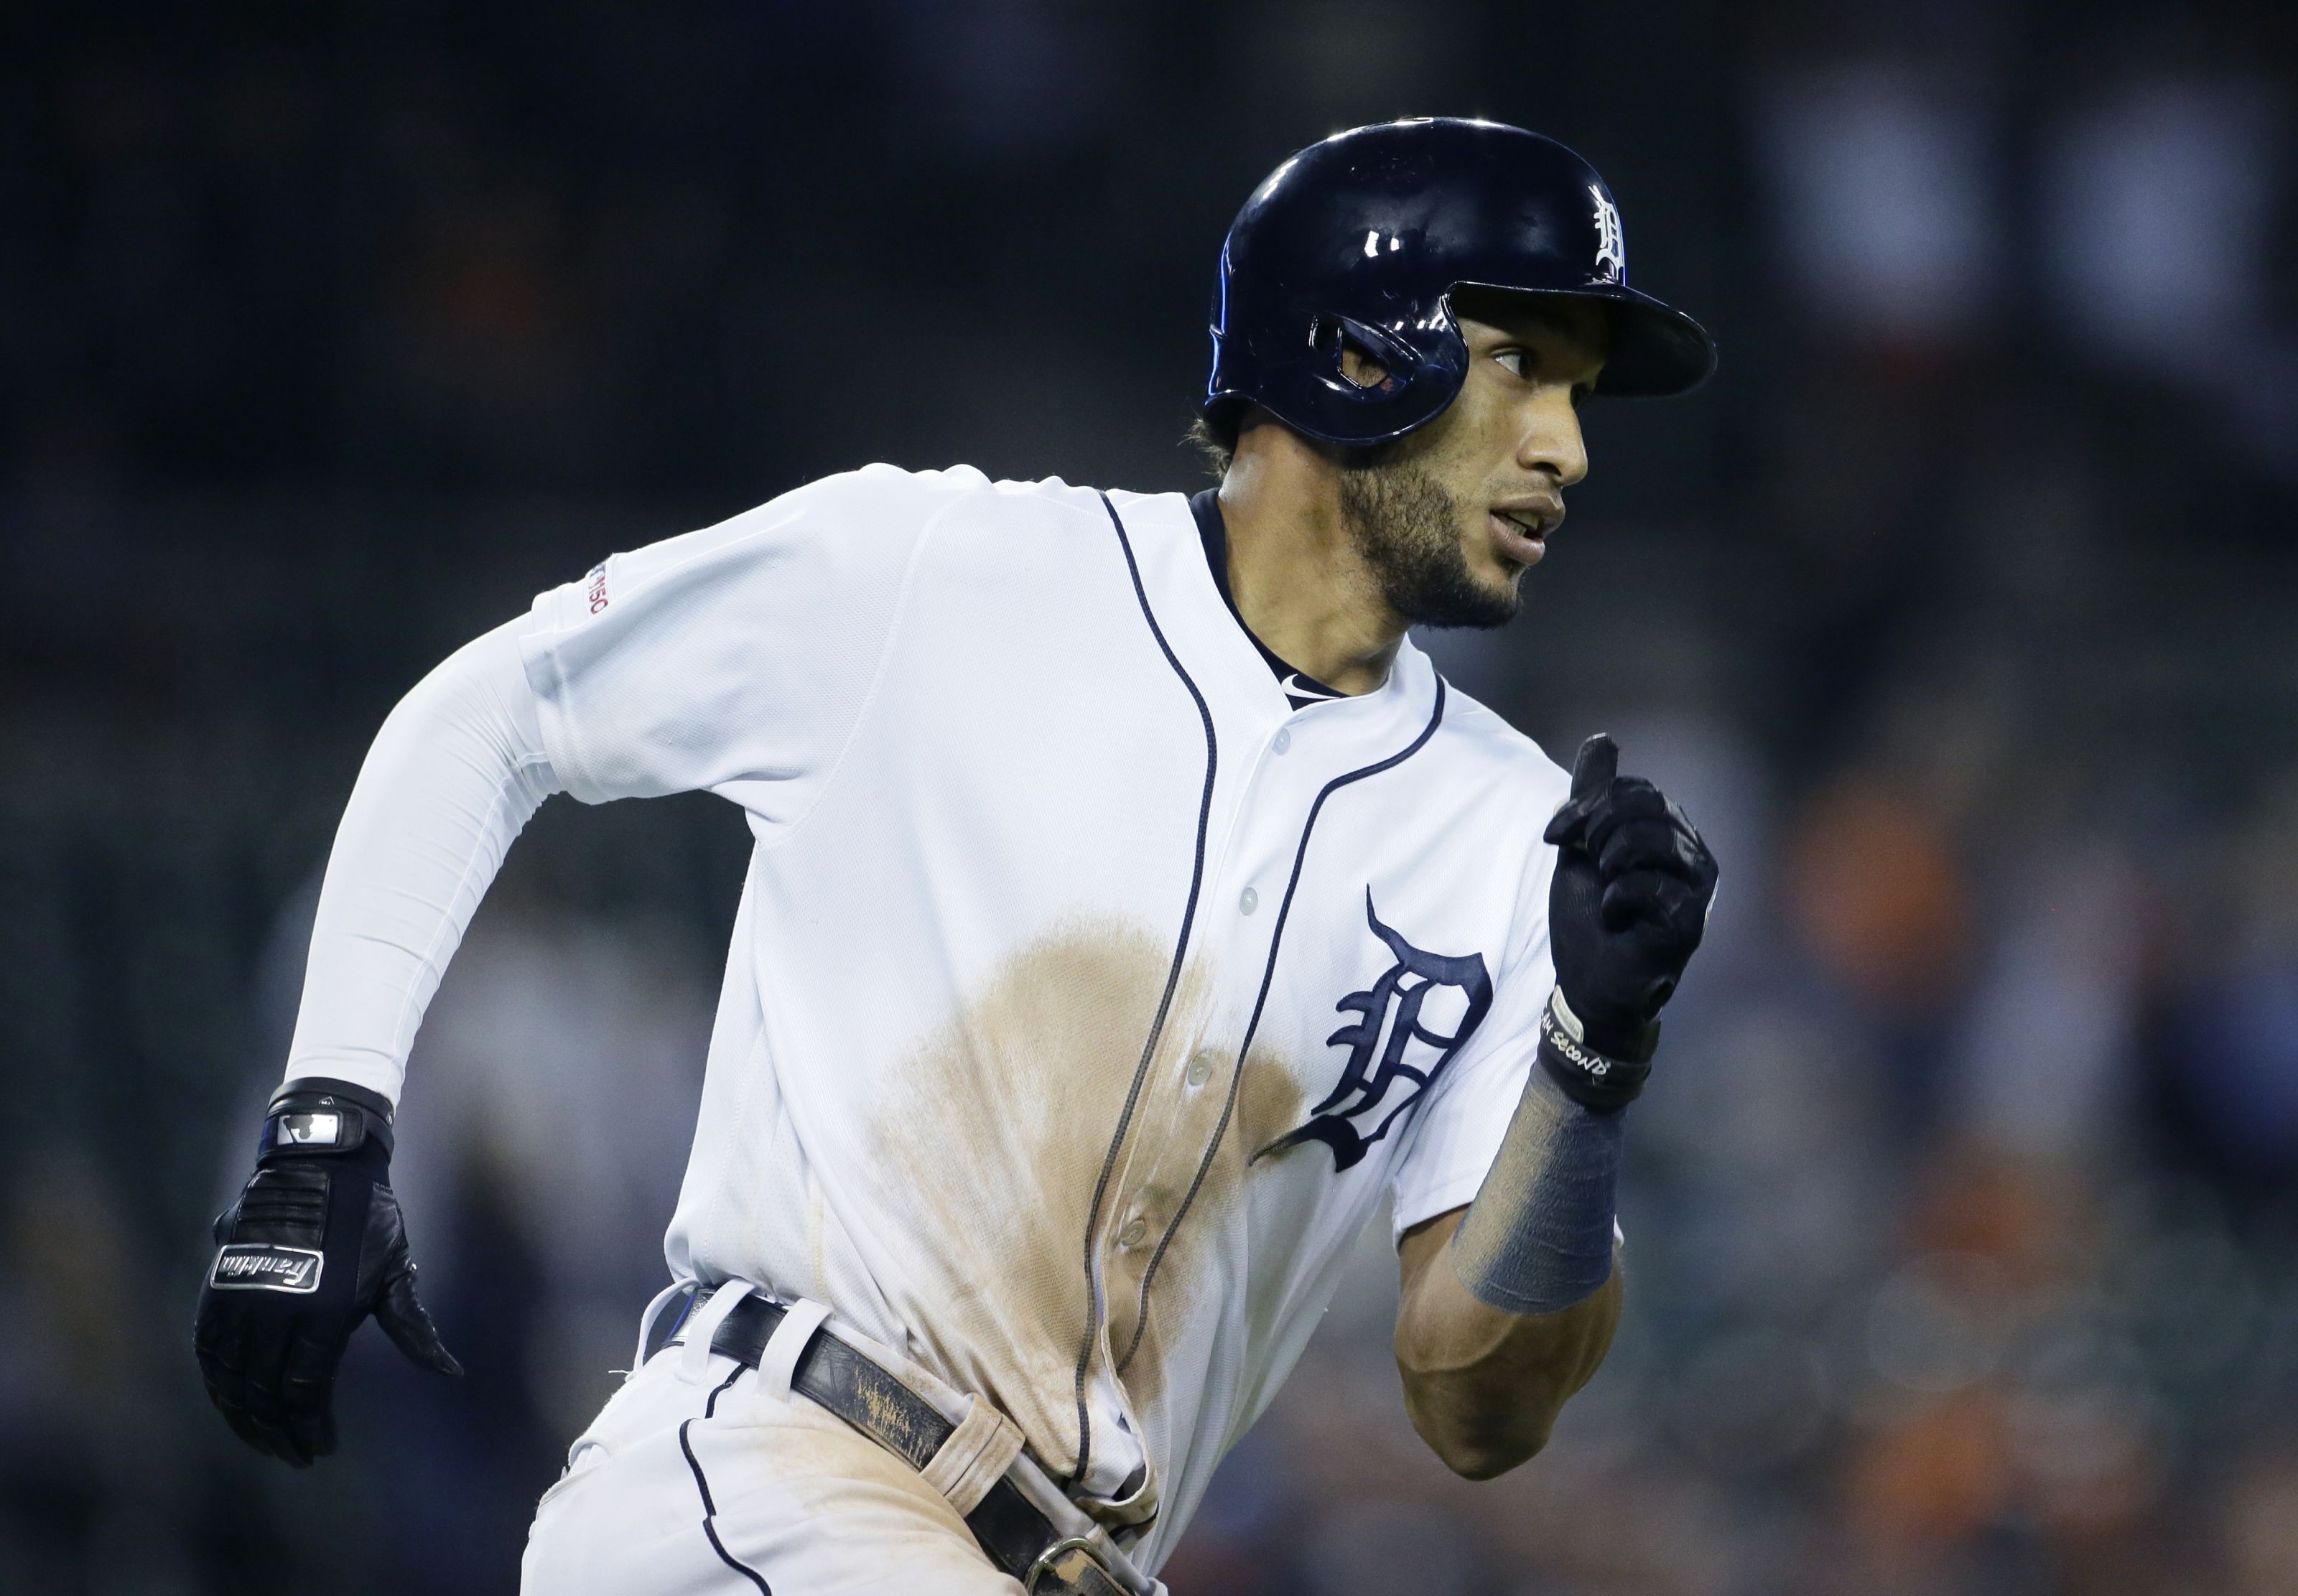 Detroit Tigers Players that could step up in the 2020 season